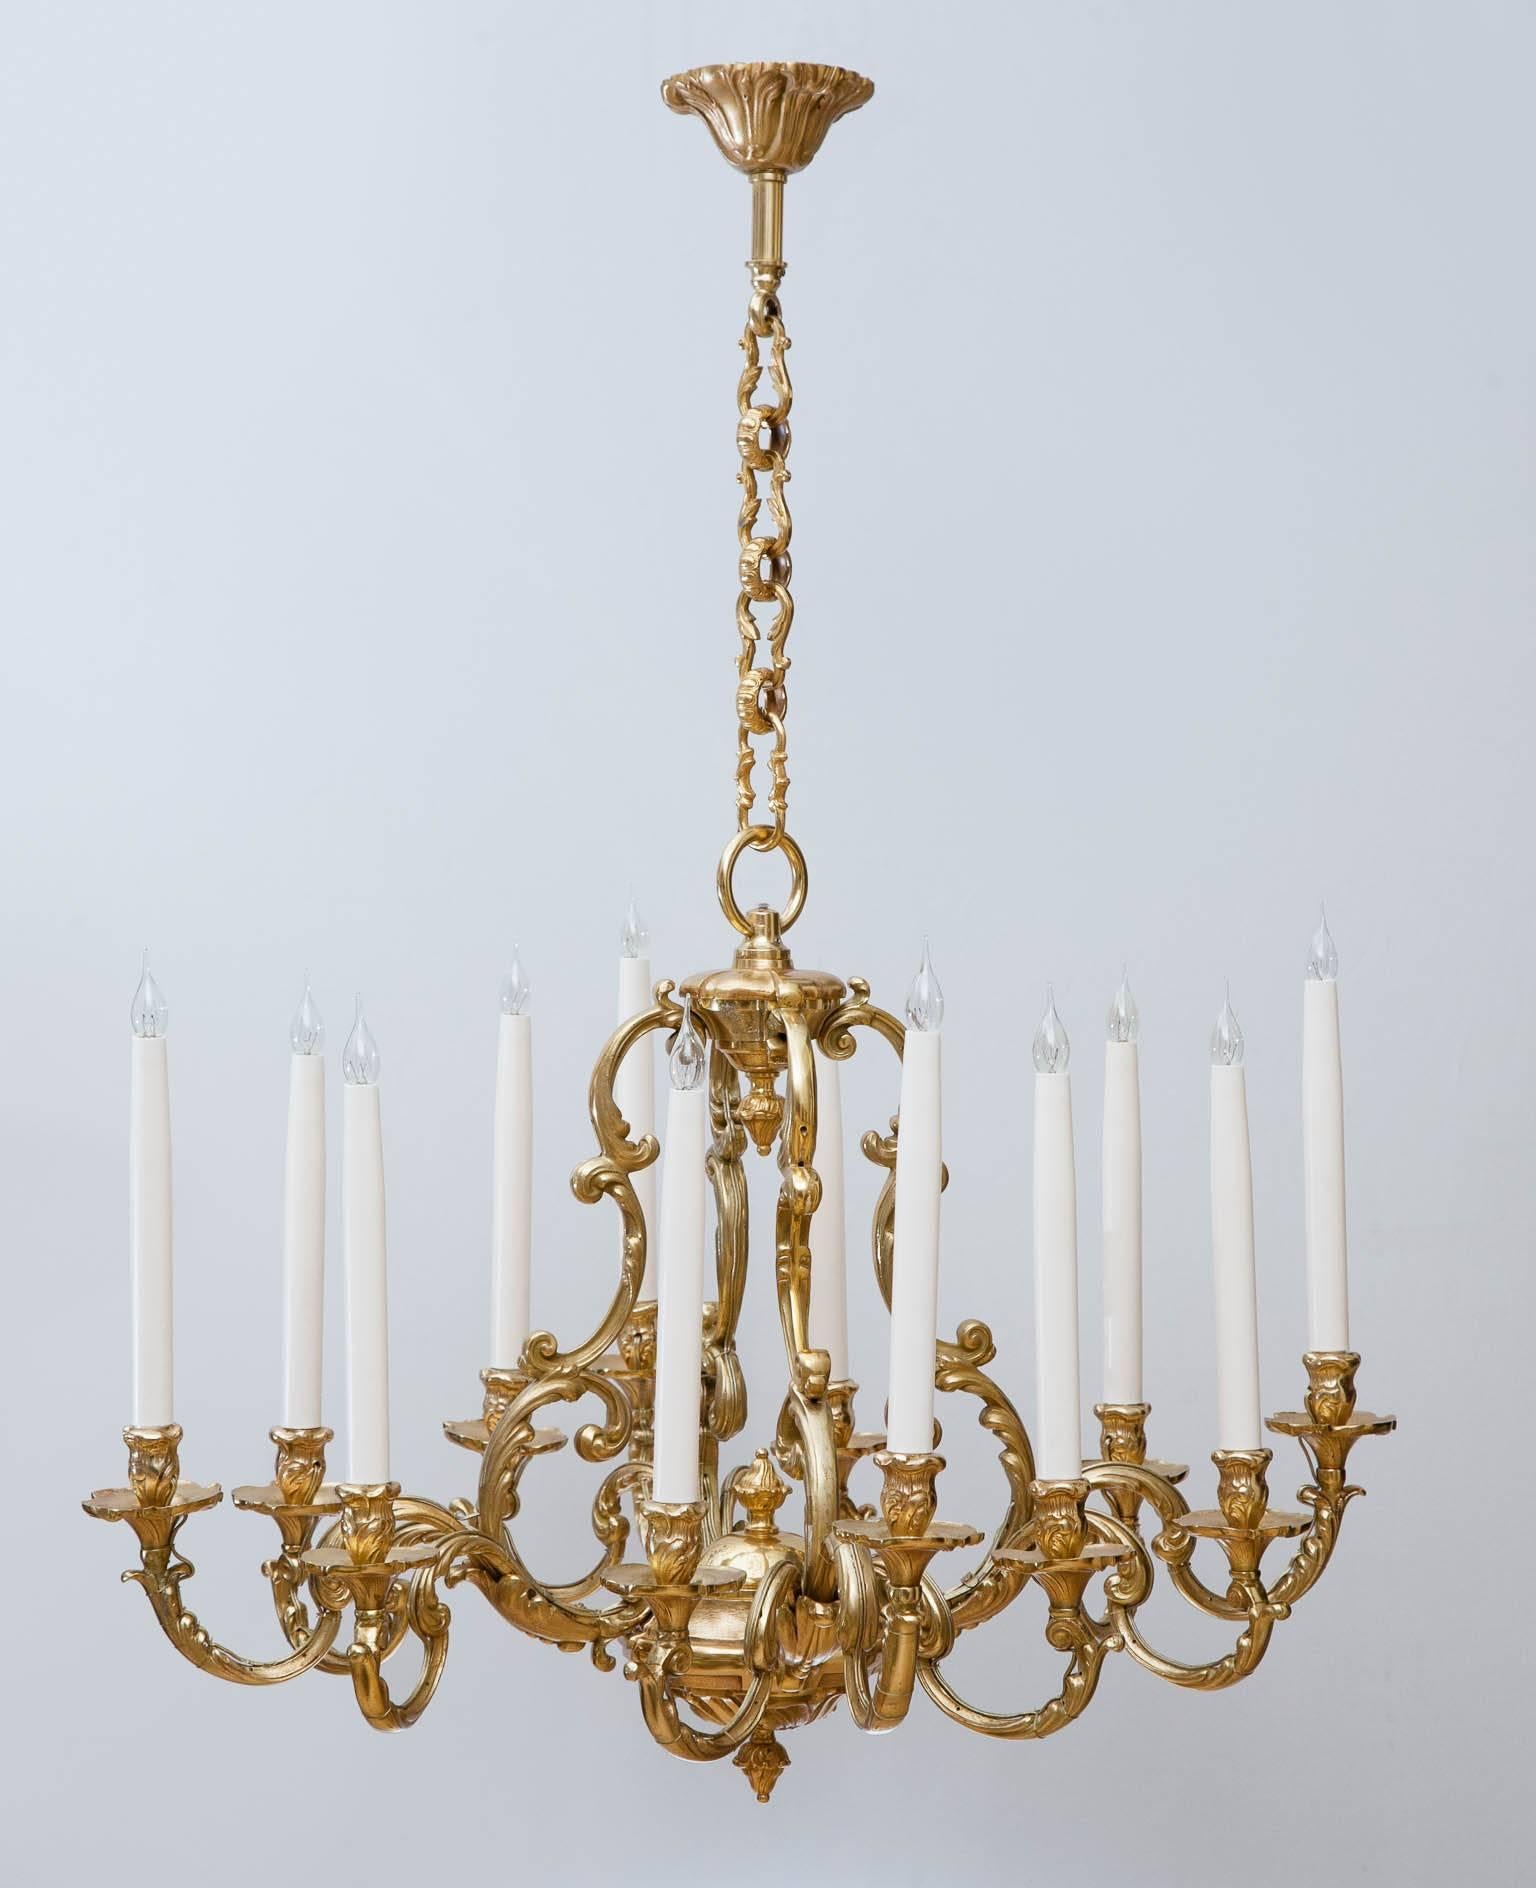 Hanging from it's own ceiling rose with fine quality decorative chain. The chandelier is supported on four shaped arms with four arms below each with three further shaped arms and tall candles. The whole decorated with finely cast and incised